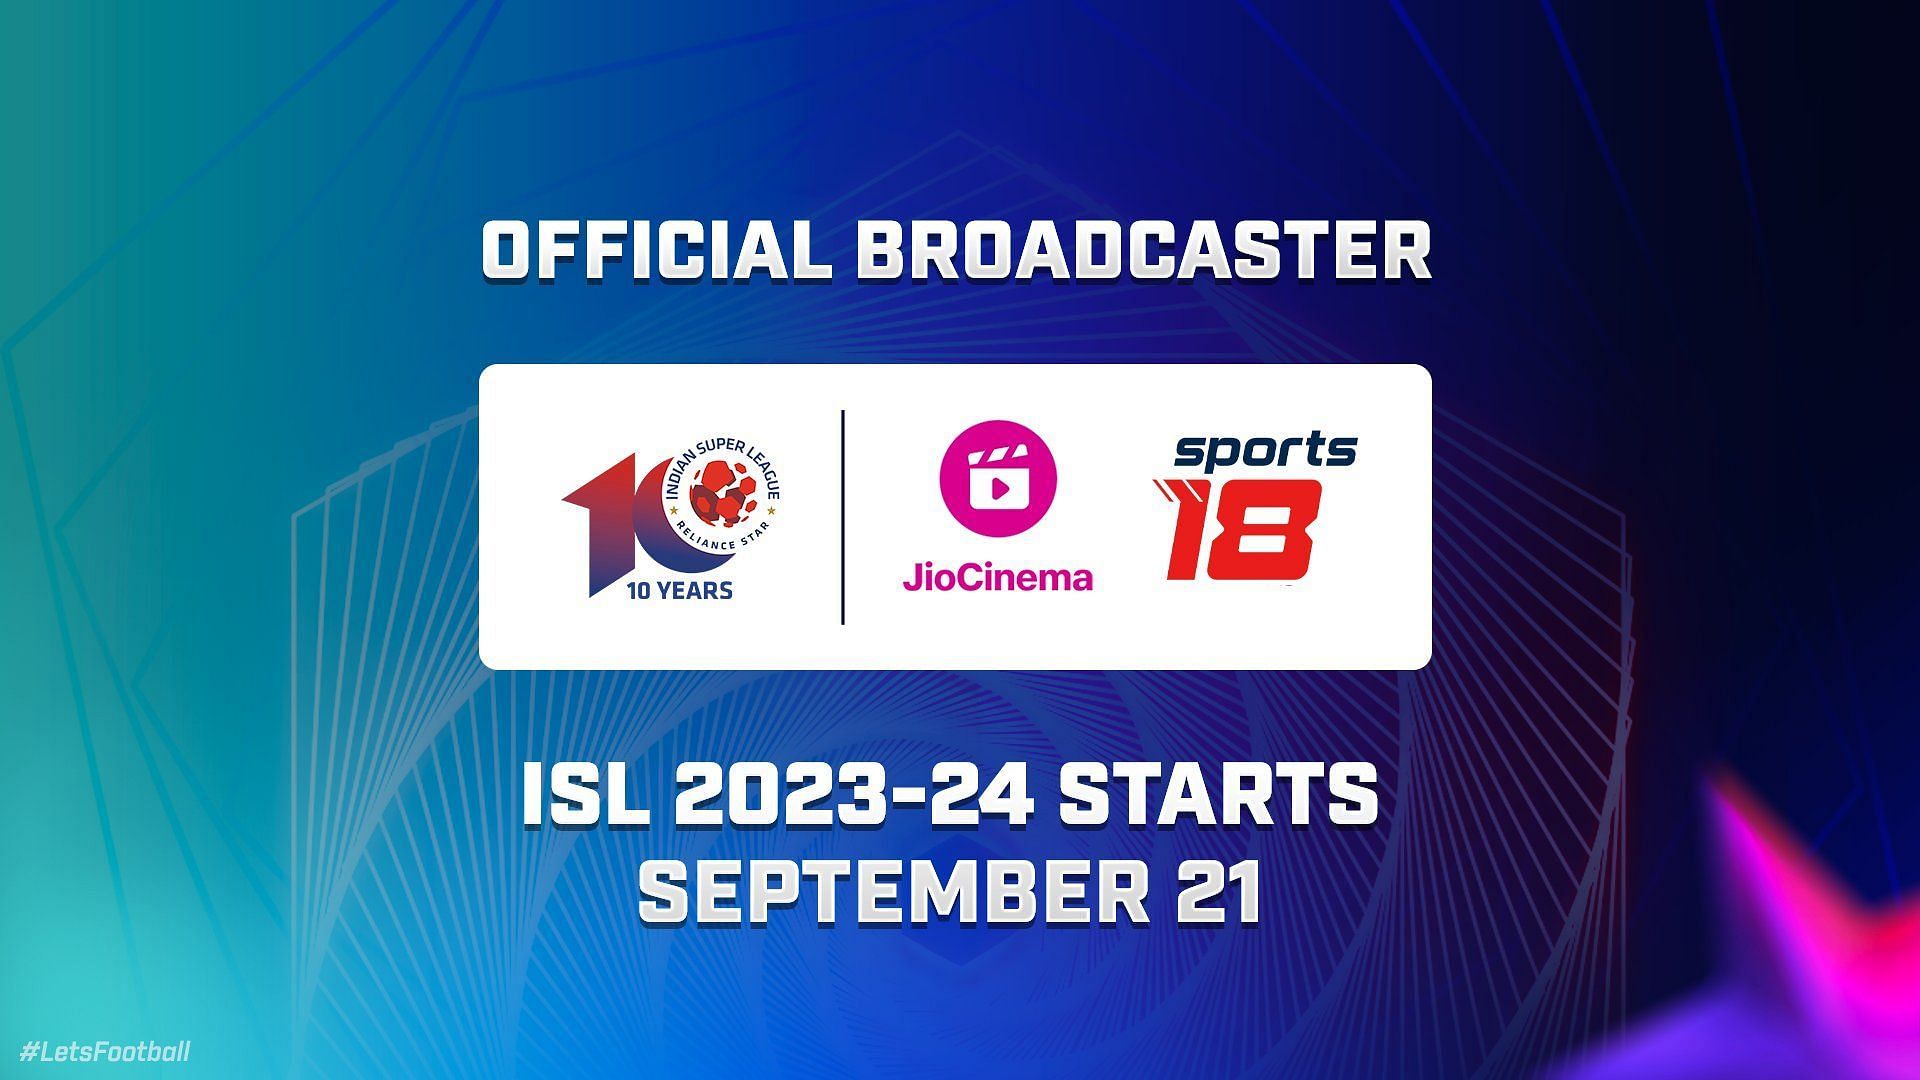 Fans can watch the Indian Super League on Sports 18 or the JioCinema app.